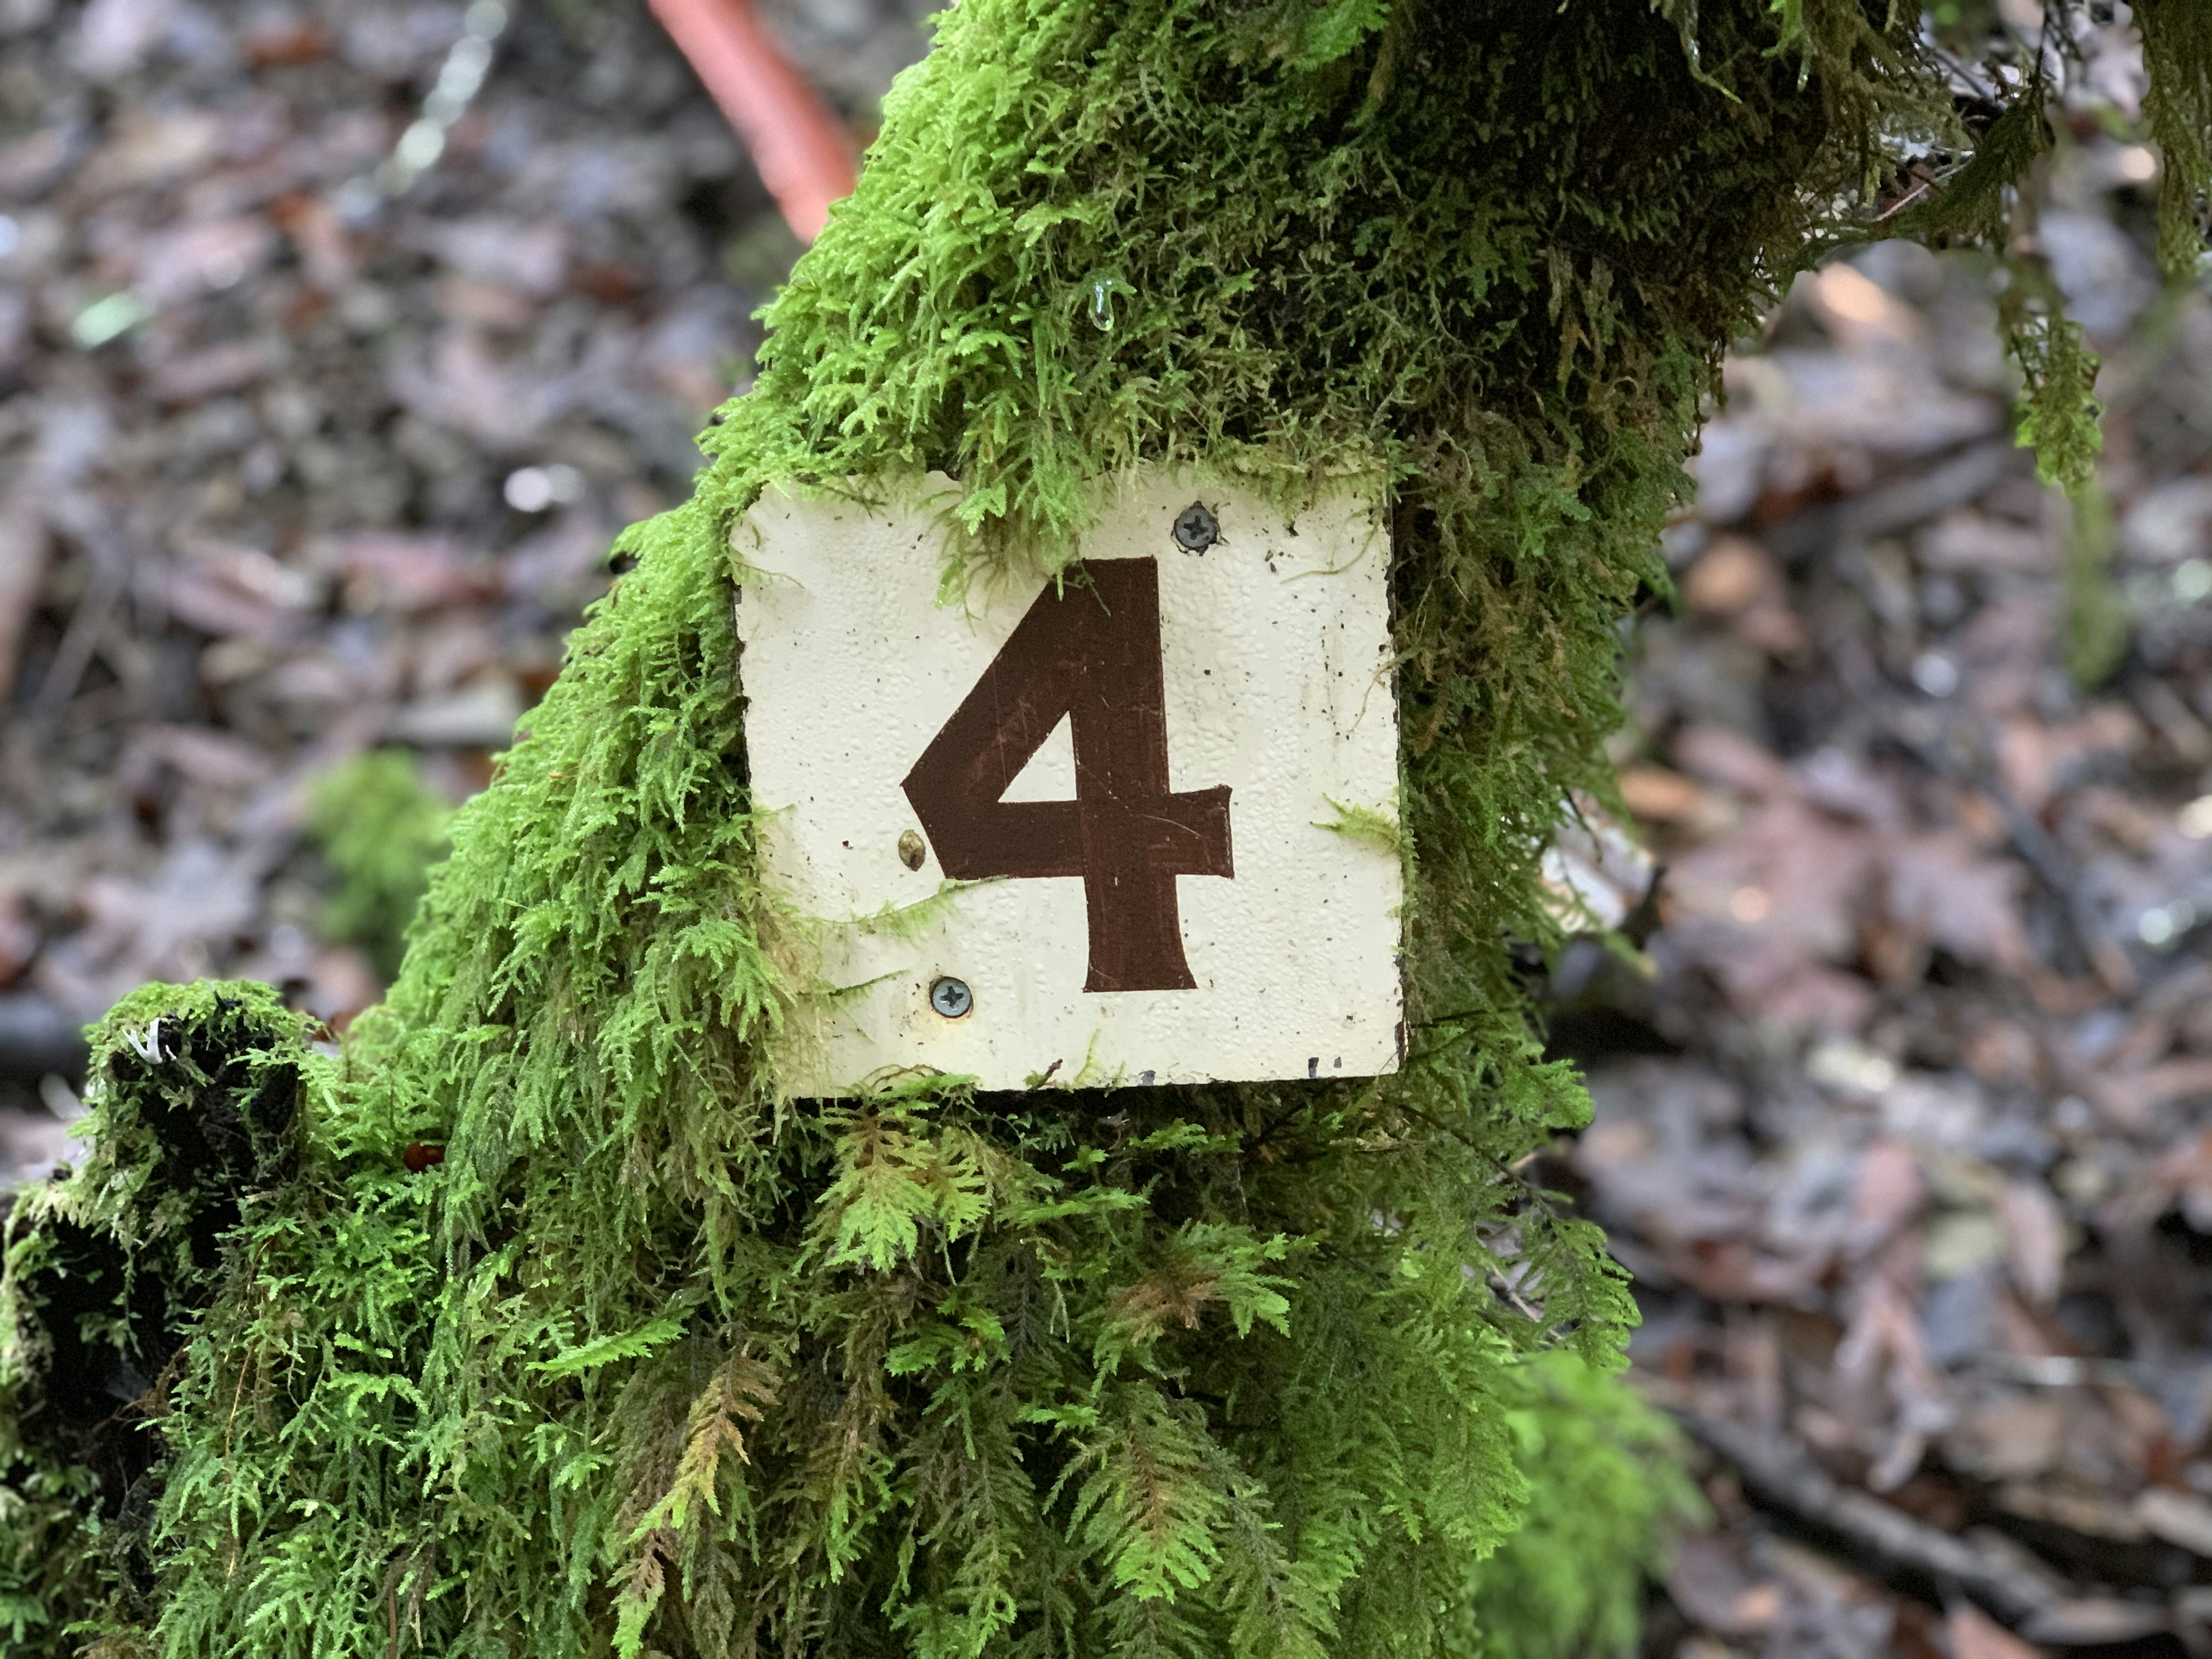 Four, 4, tree, signage, green, moss